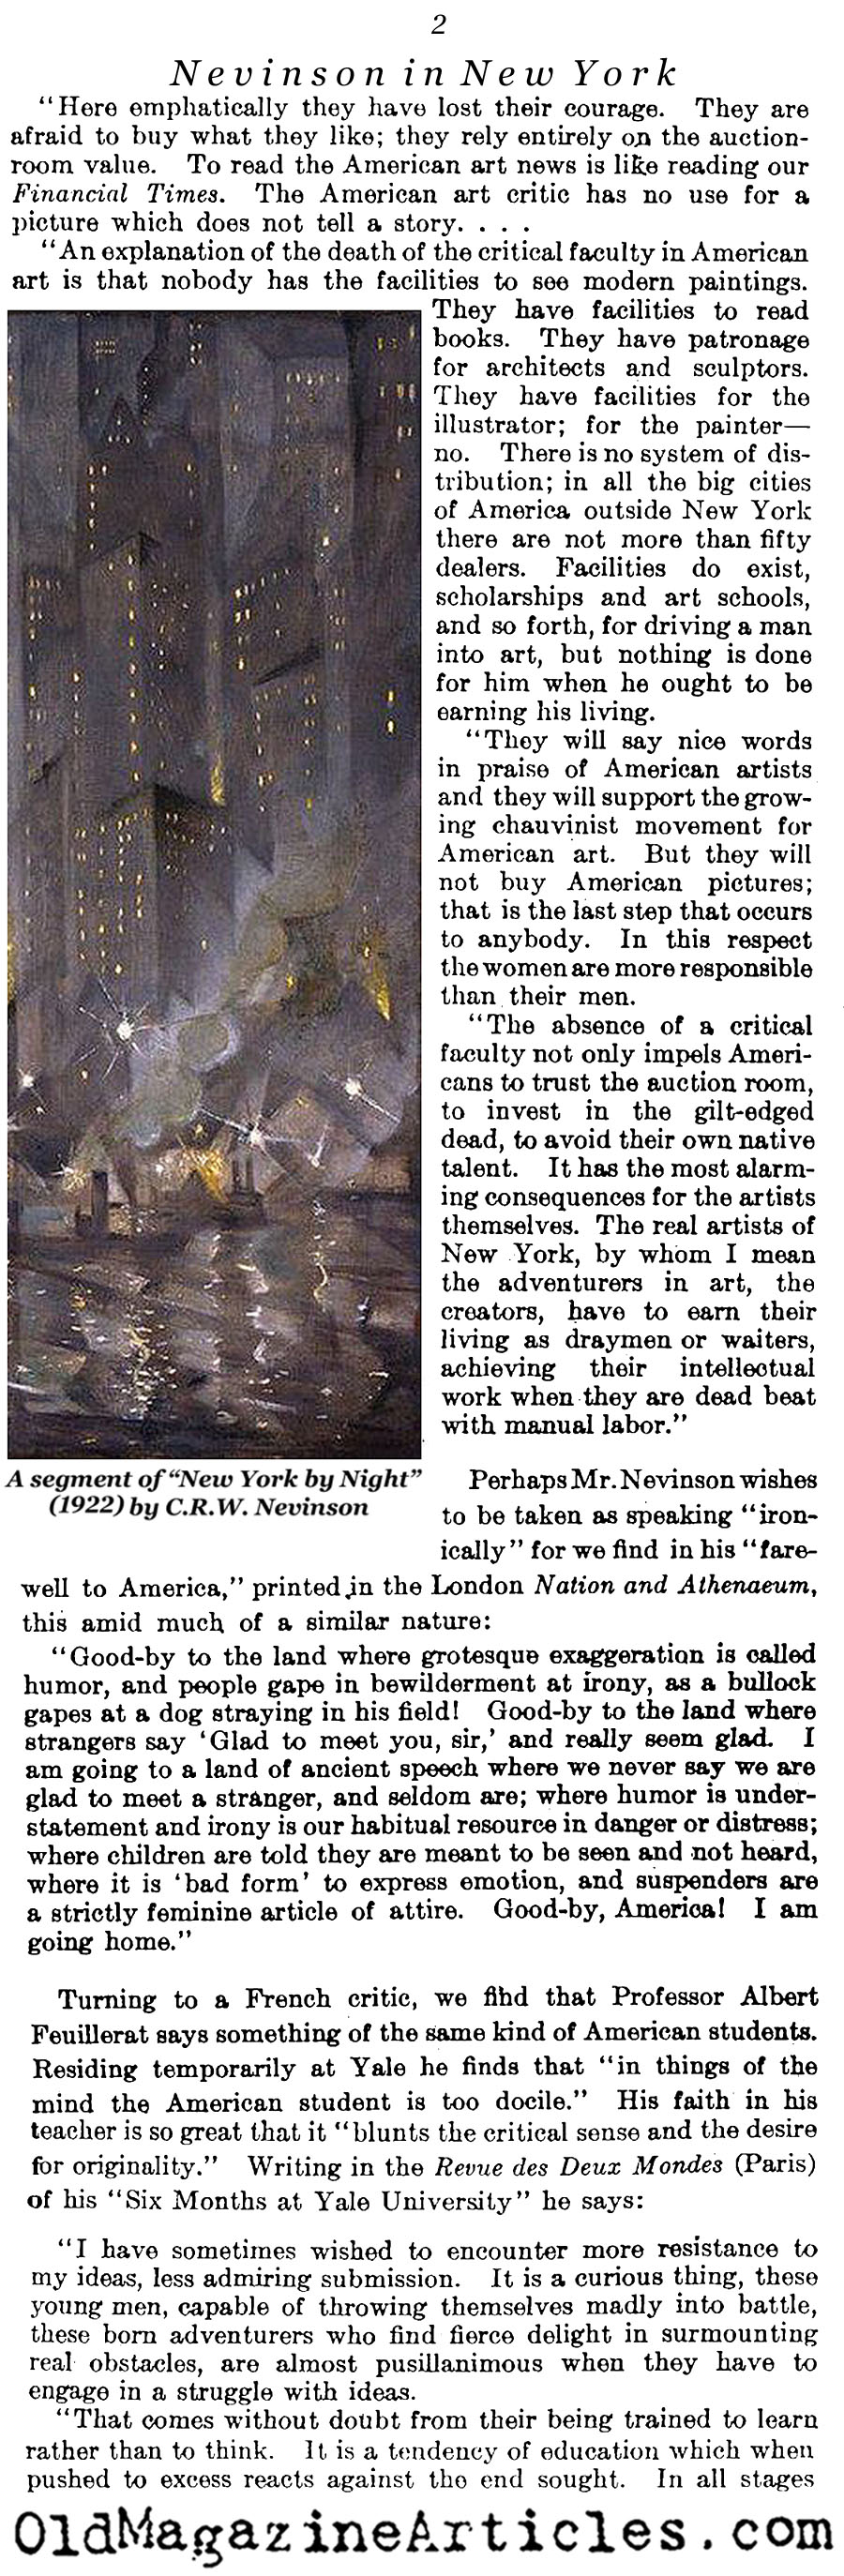 C.R.W. Nevinson Rants About  the American Art World (Literary Digest, 1922)